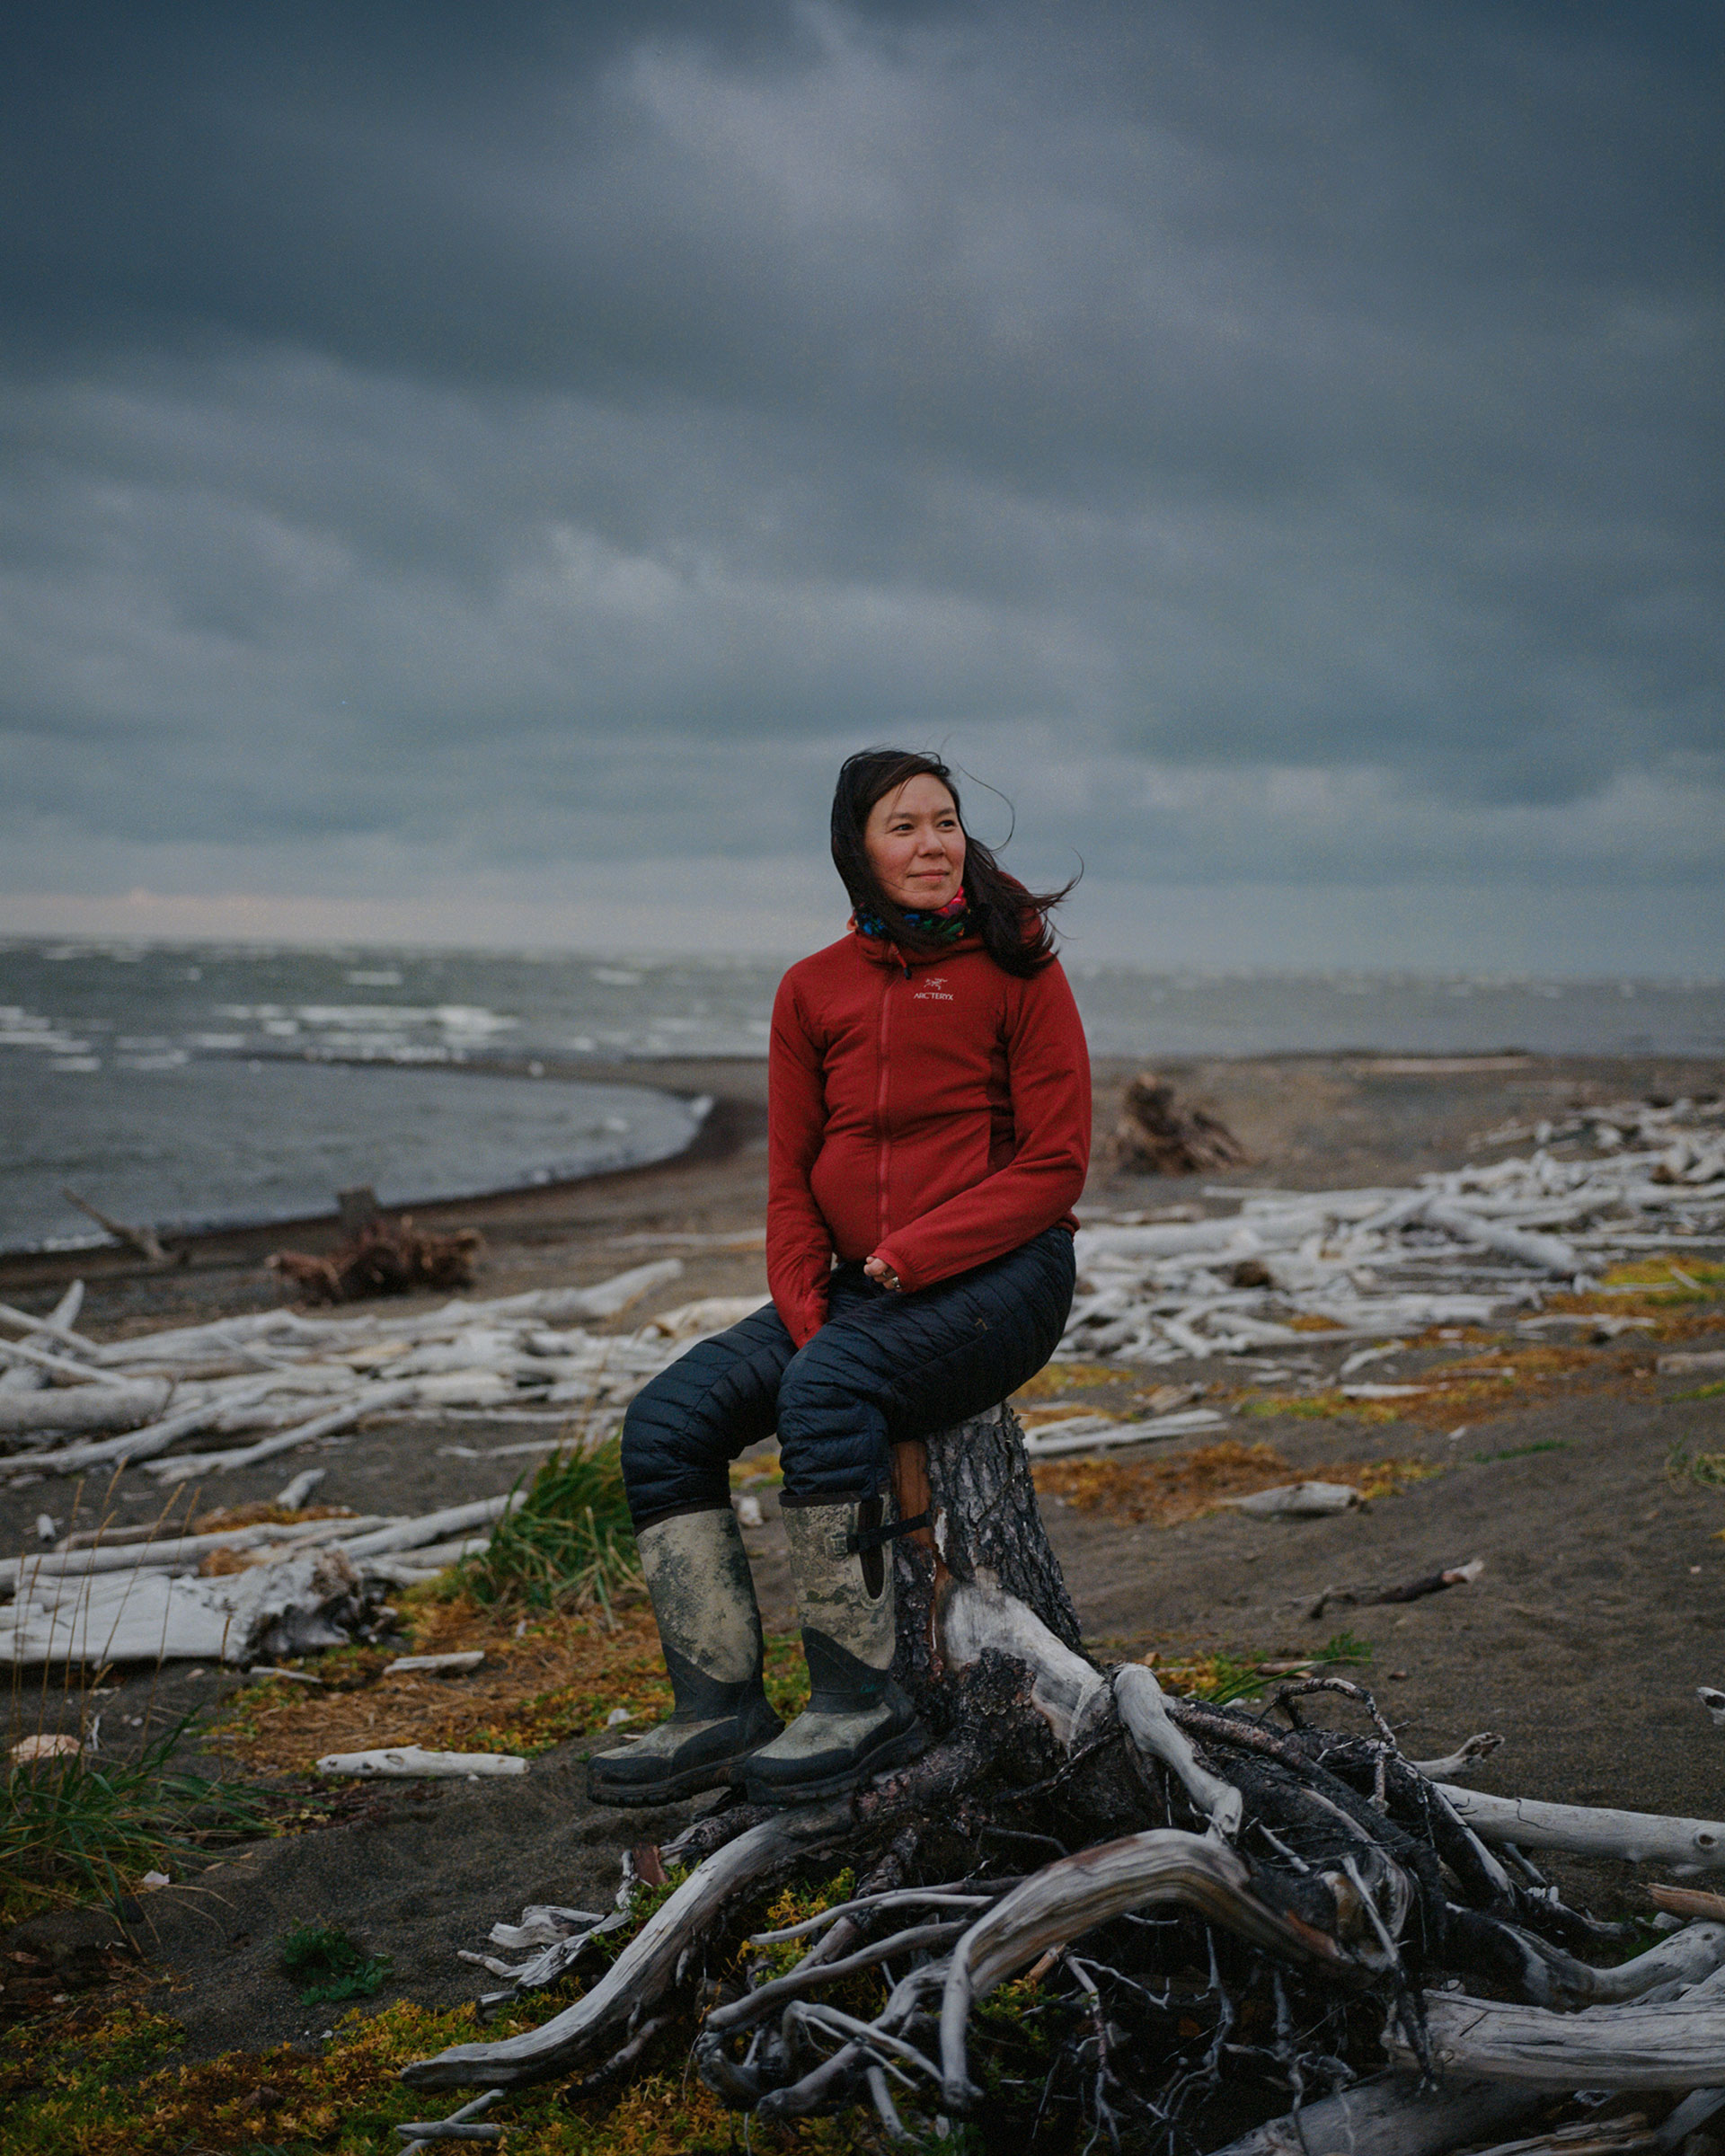 Laureli Ivanoff is devastated for her son, who may never have a chance to experience key aspects of Inupiaq culture because of climate change. (Acacia Johnson for TIME)